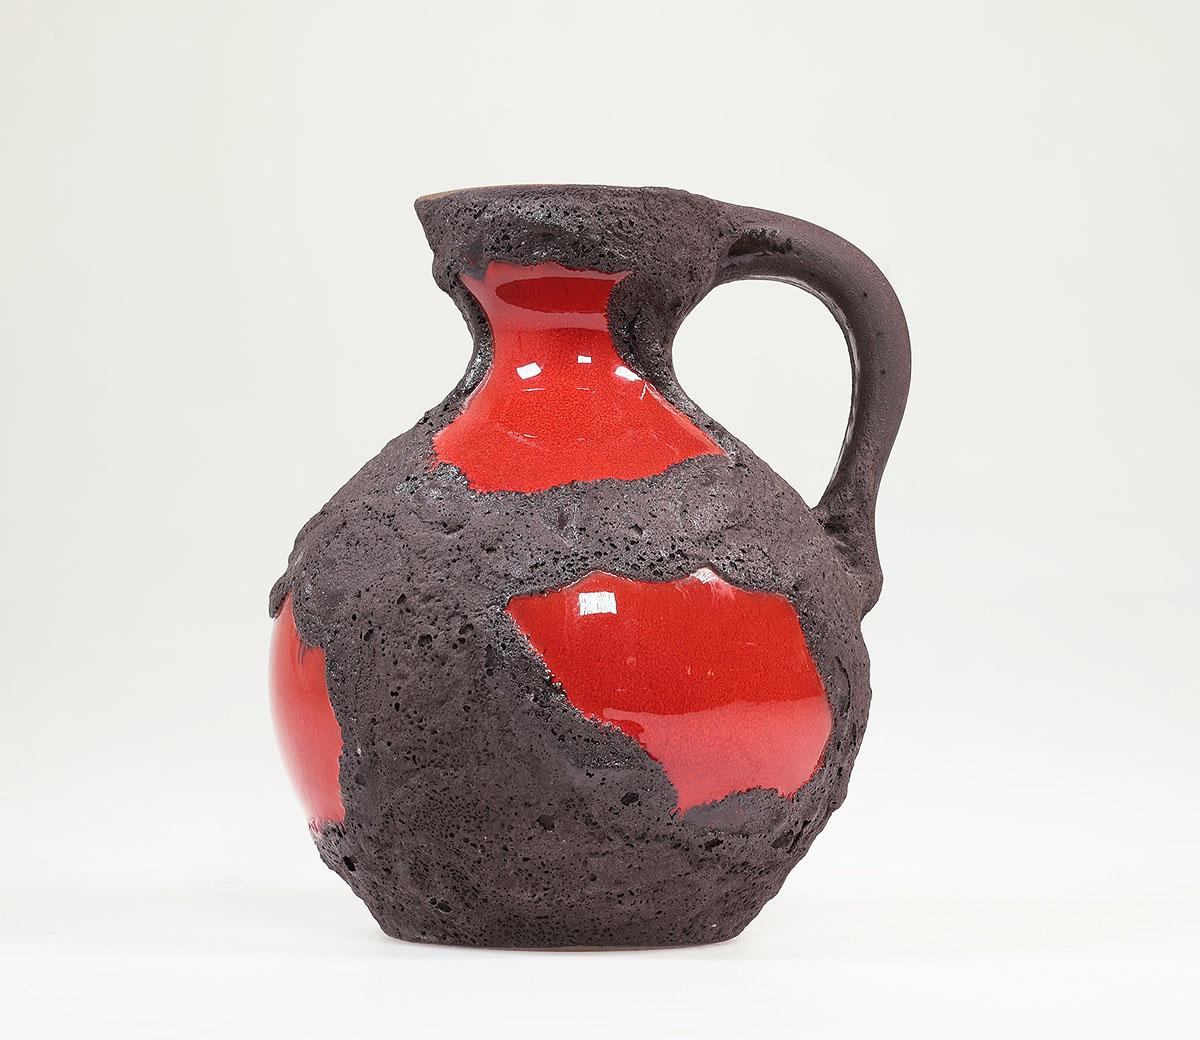 Vintage ceramic Fat lava vase produced by Marei Keramik, West Germany. 1970s.

Beautiful jug vase in a fire brigade red gloss glaze with thick dark brown rough decor.

High 19 cm.

numbered 4301

In good condition.

